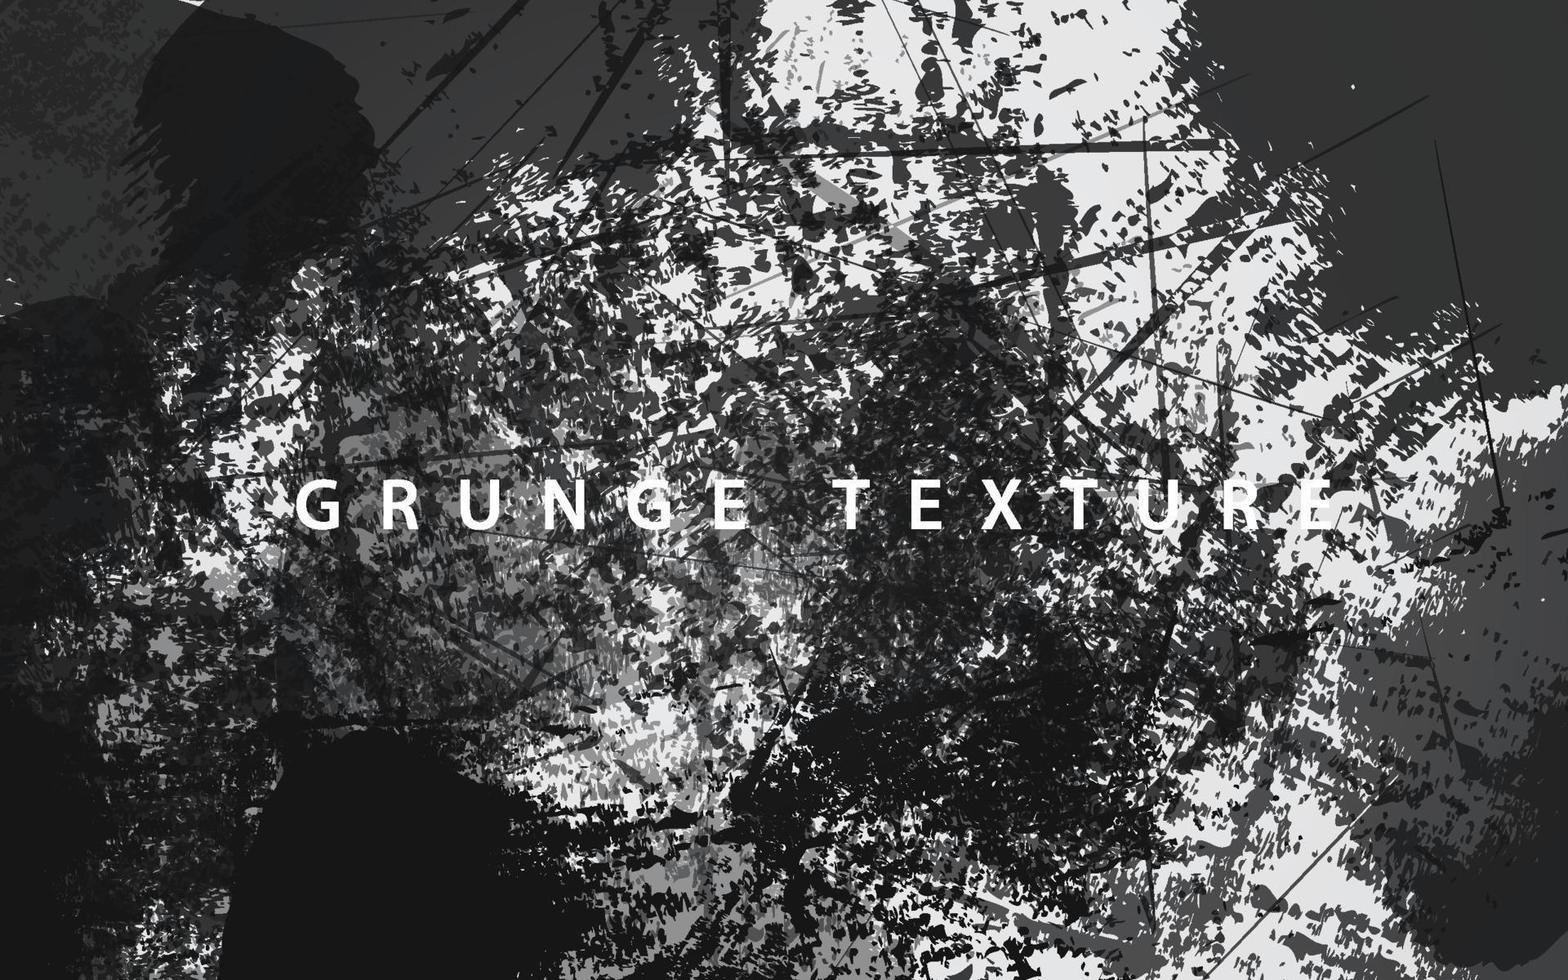 Abstract grunge textur wall background vector